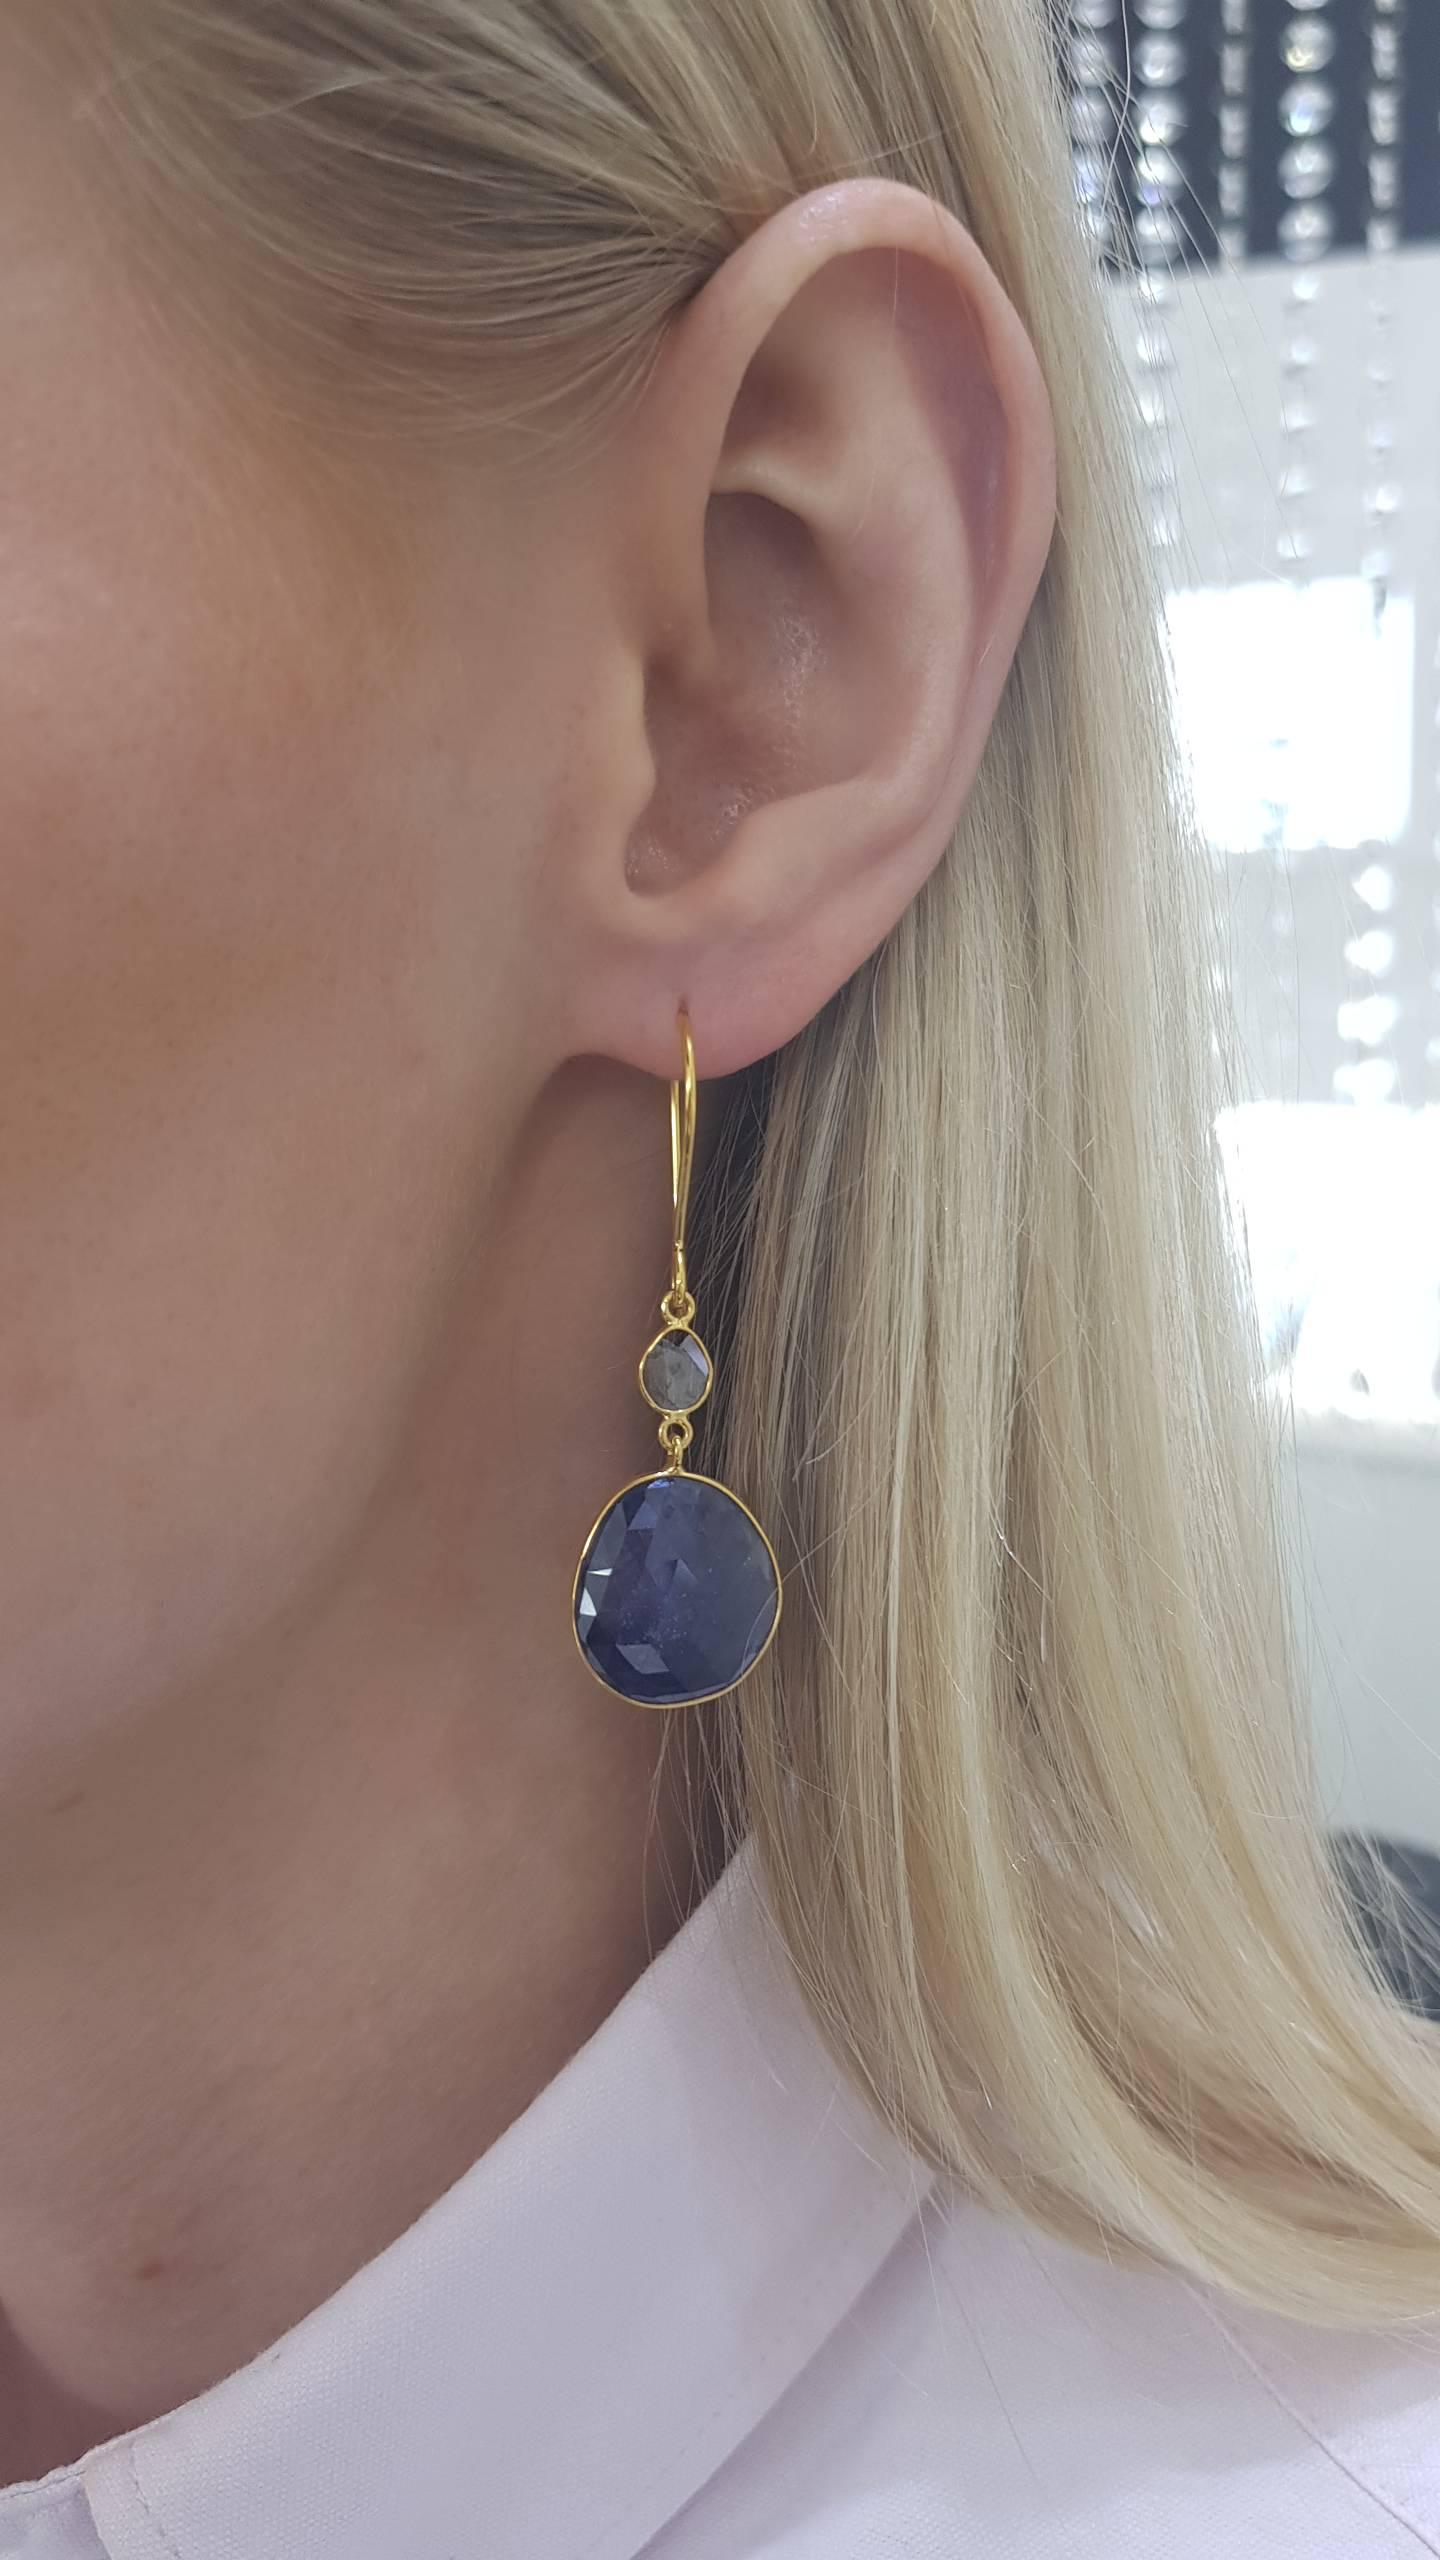 These Gorgeous 20.00 Carats Rose Cut Blue Sapphire Earrings from the Artisan Collection made by Tresor Paris featuring 0.30 Carat in two Diamond slices set in 18 Karat Yellow Gold. Each piece is hand made with a unique shaped precious stones. These